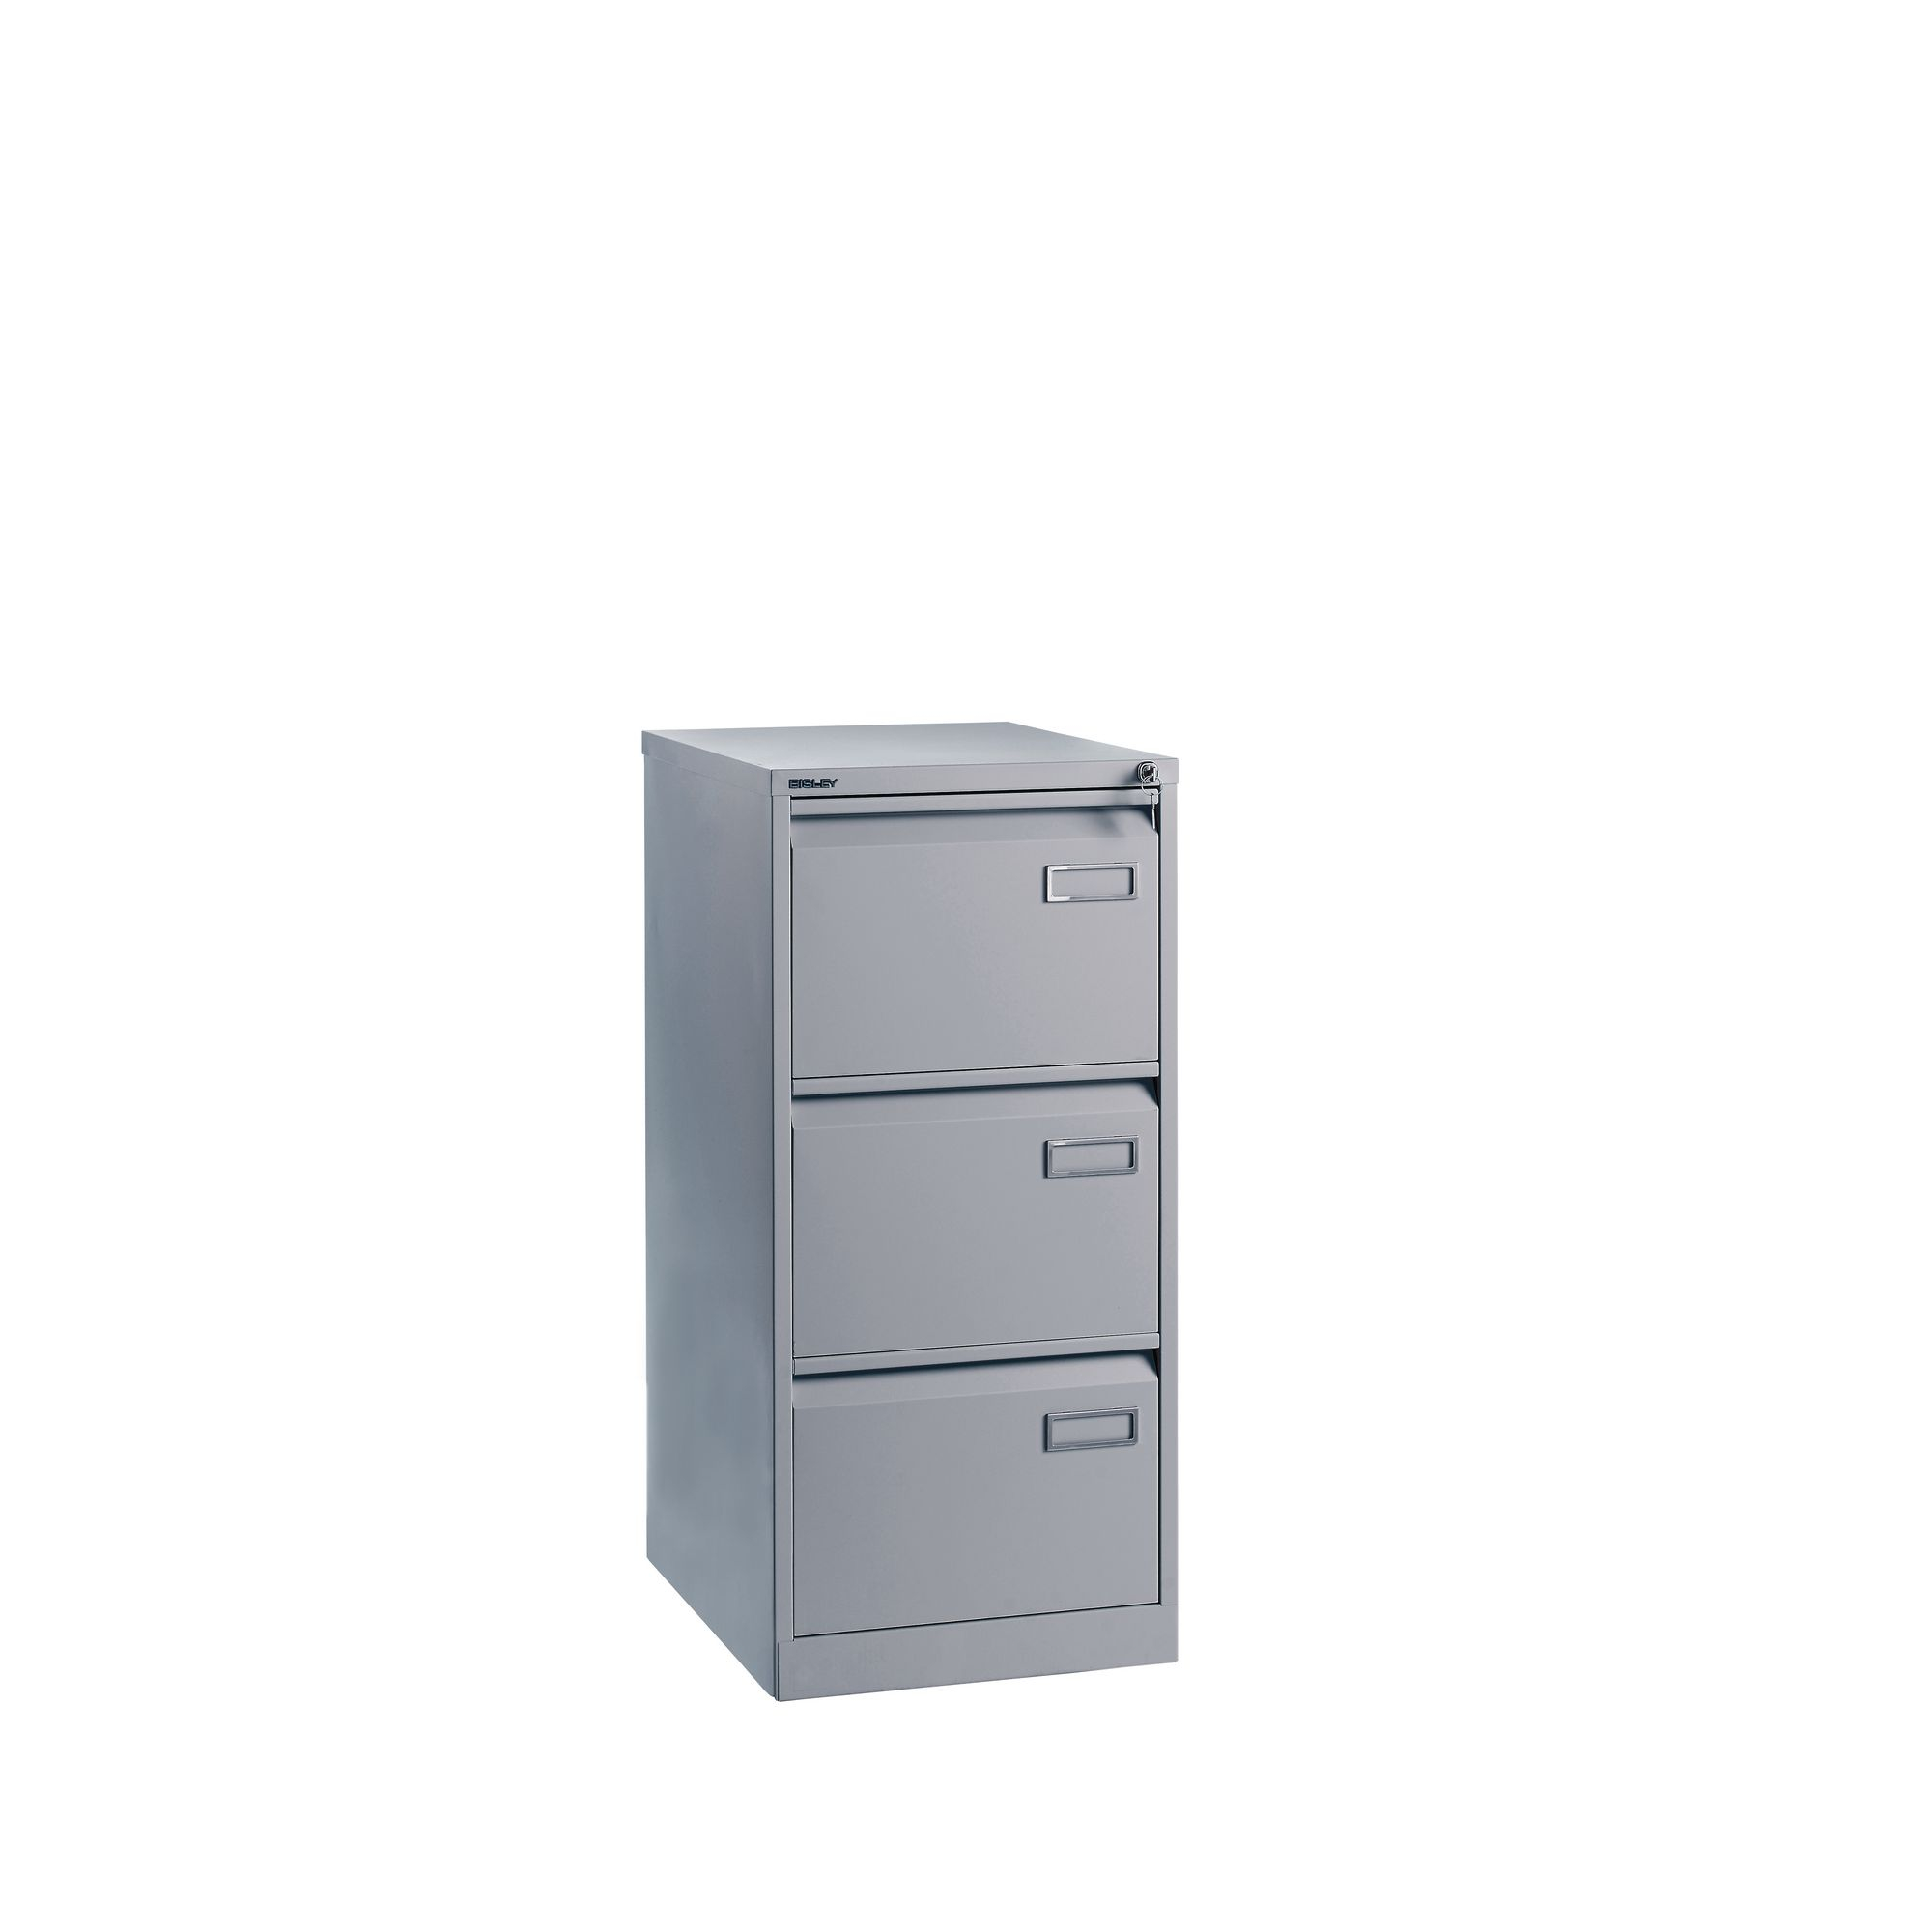 Bisley 3 Drawer Filing Cabinet Silver Hope Education intended for dimensions 2000 X 2000